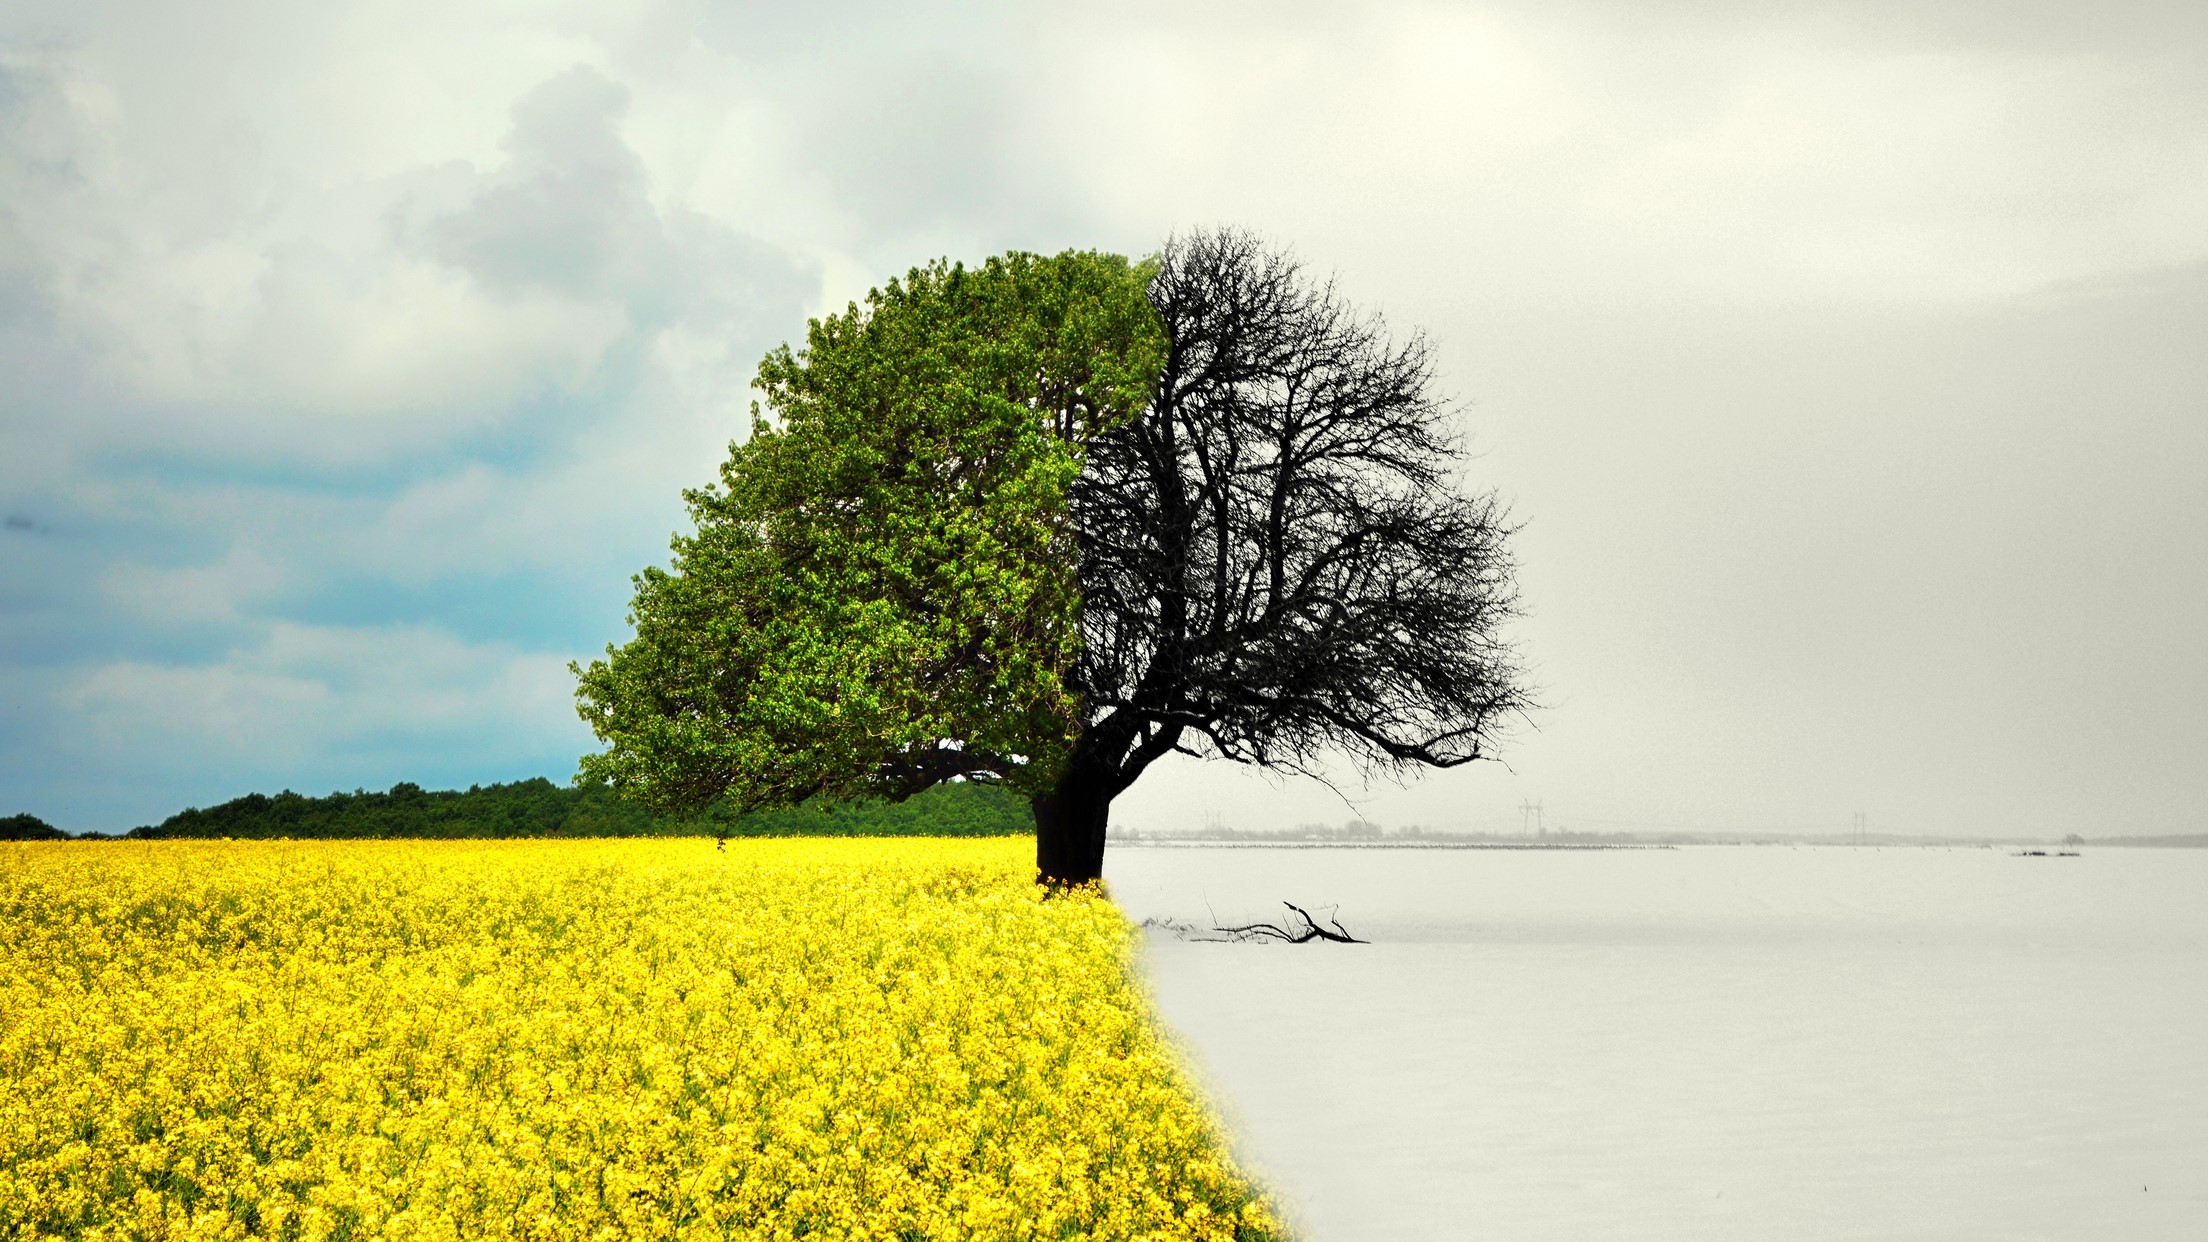 The four seasons: spring, summer, autumn (fall) and winter | Live Science